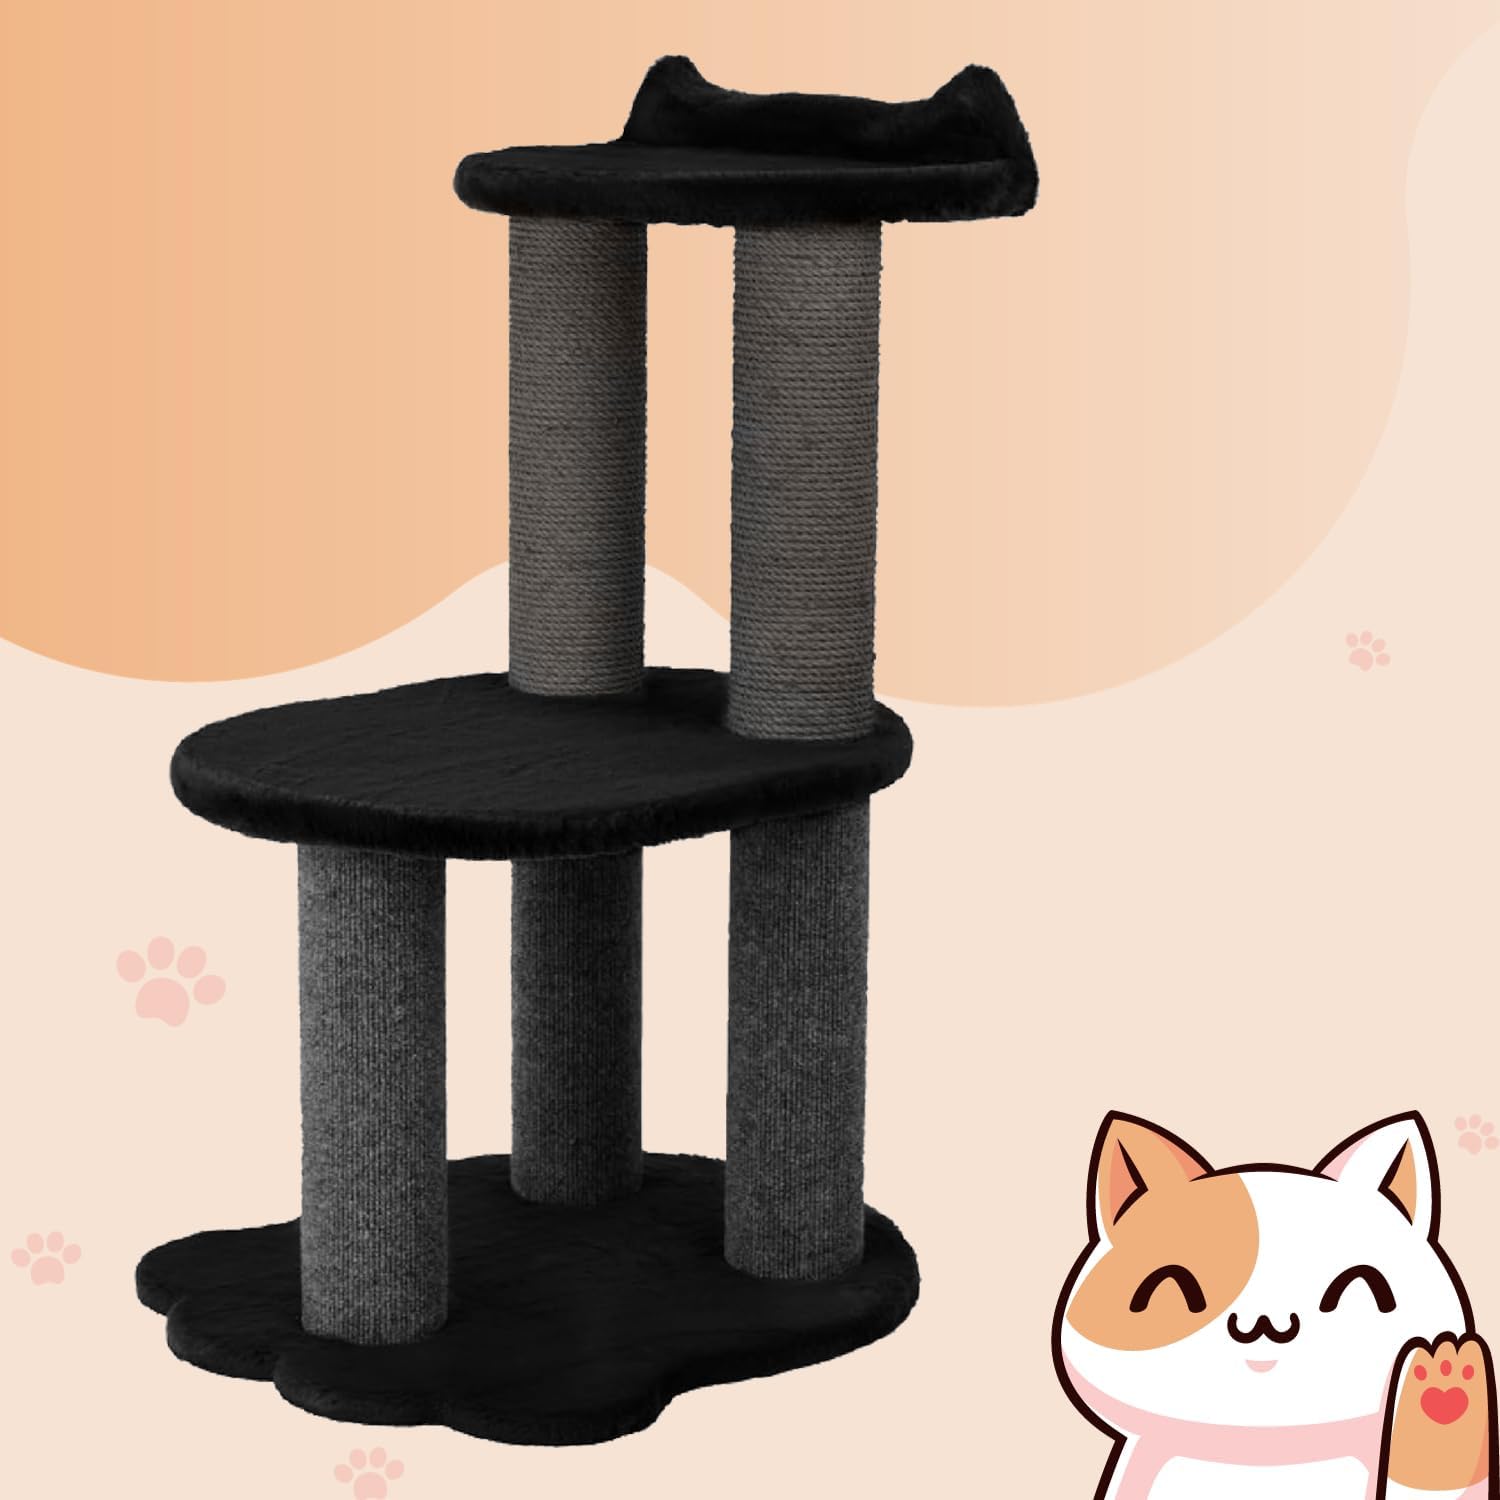 34 Inch Classic Comfort for Indoor Modern Premium Cats and Kittens Scratching Tower Larger Base for Better Stability, (Furs: Black, Rope: Charcoal)